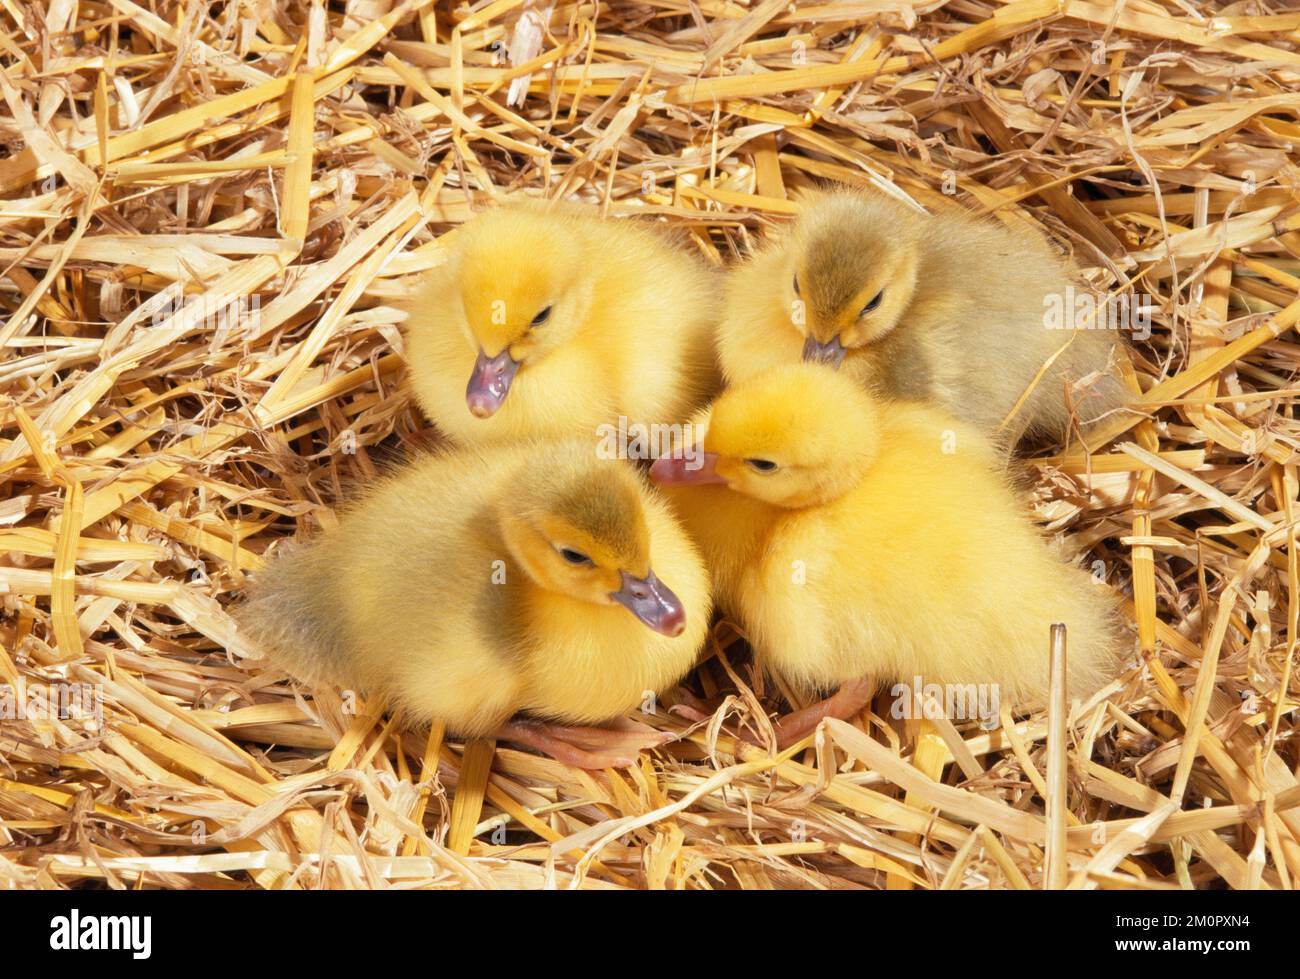 MUSCOVY DUCK - Ducklings huddled in straw Stock Photo